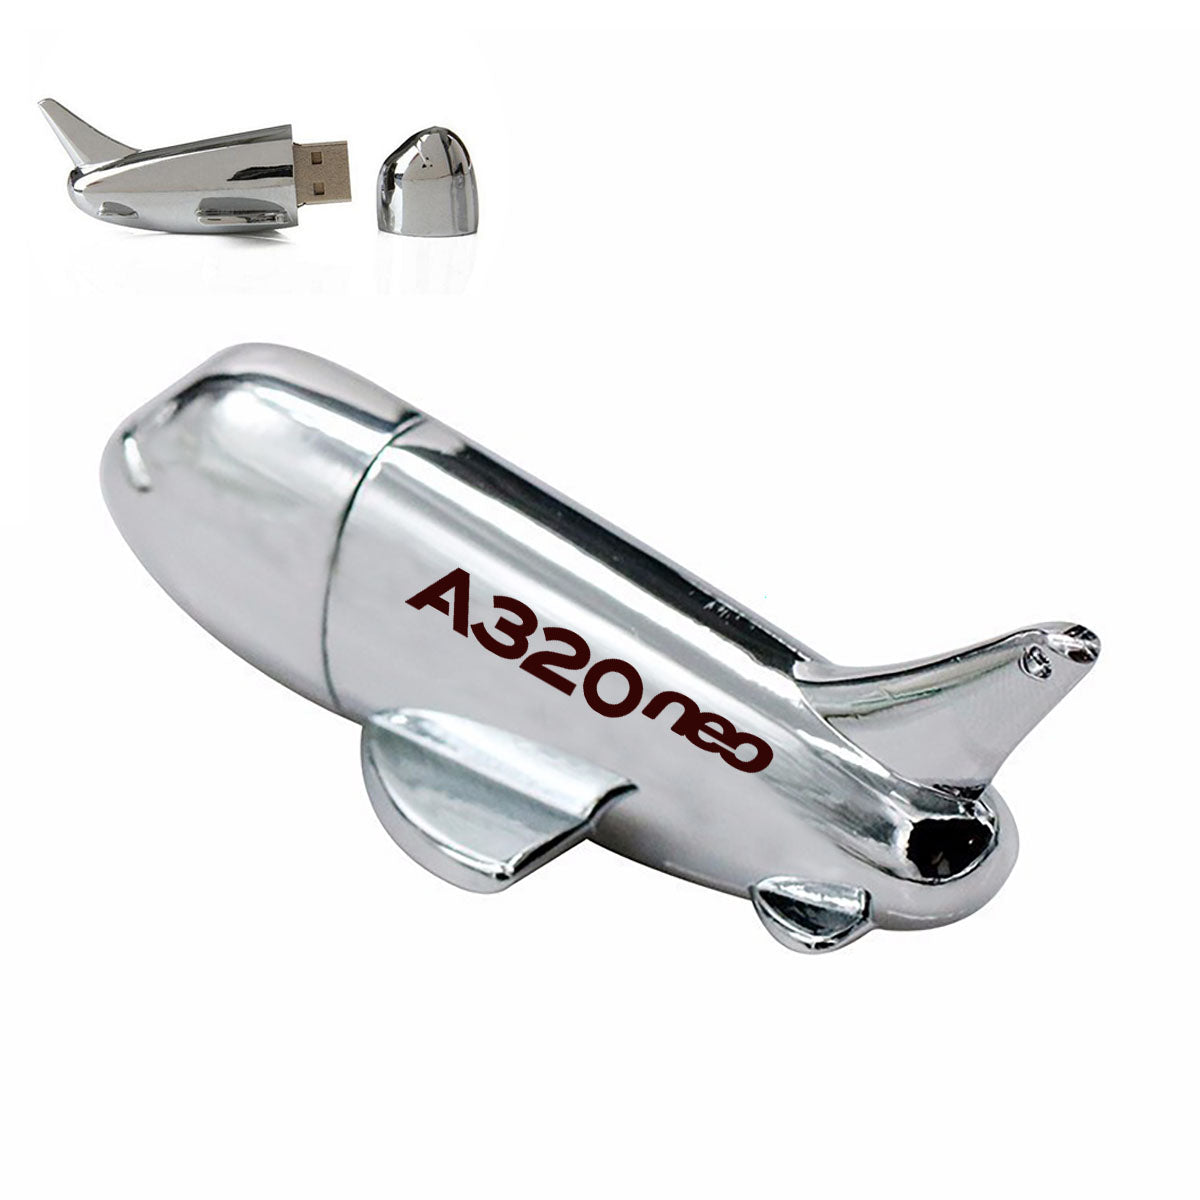 A320neo & Text Designed Airplane Shape USB Drives